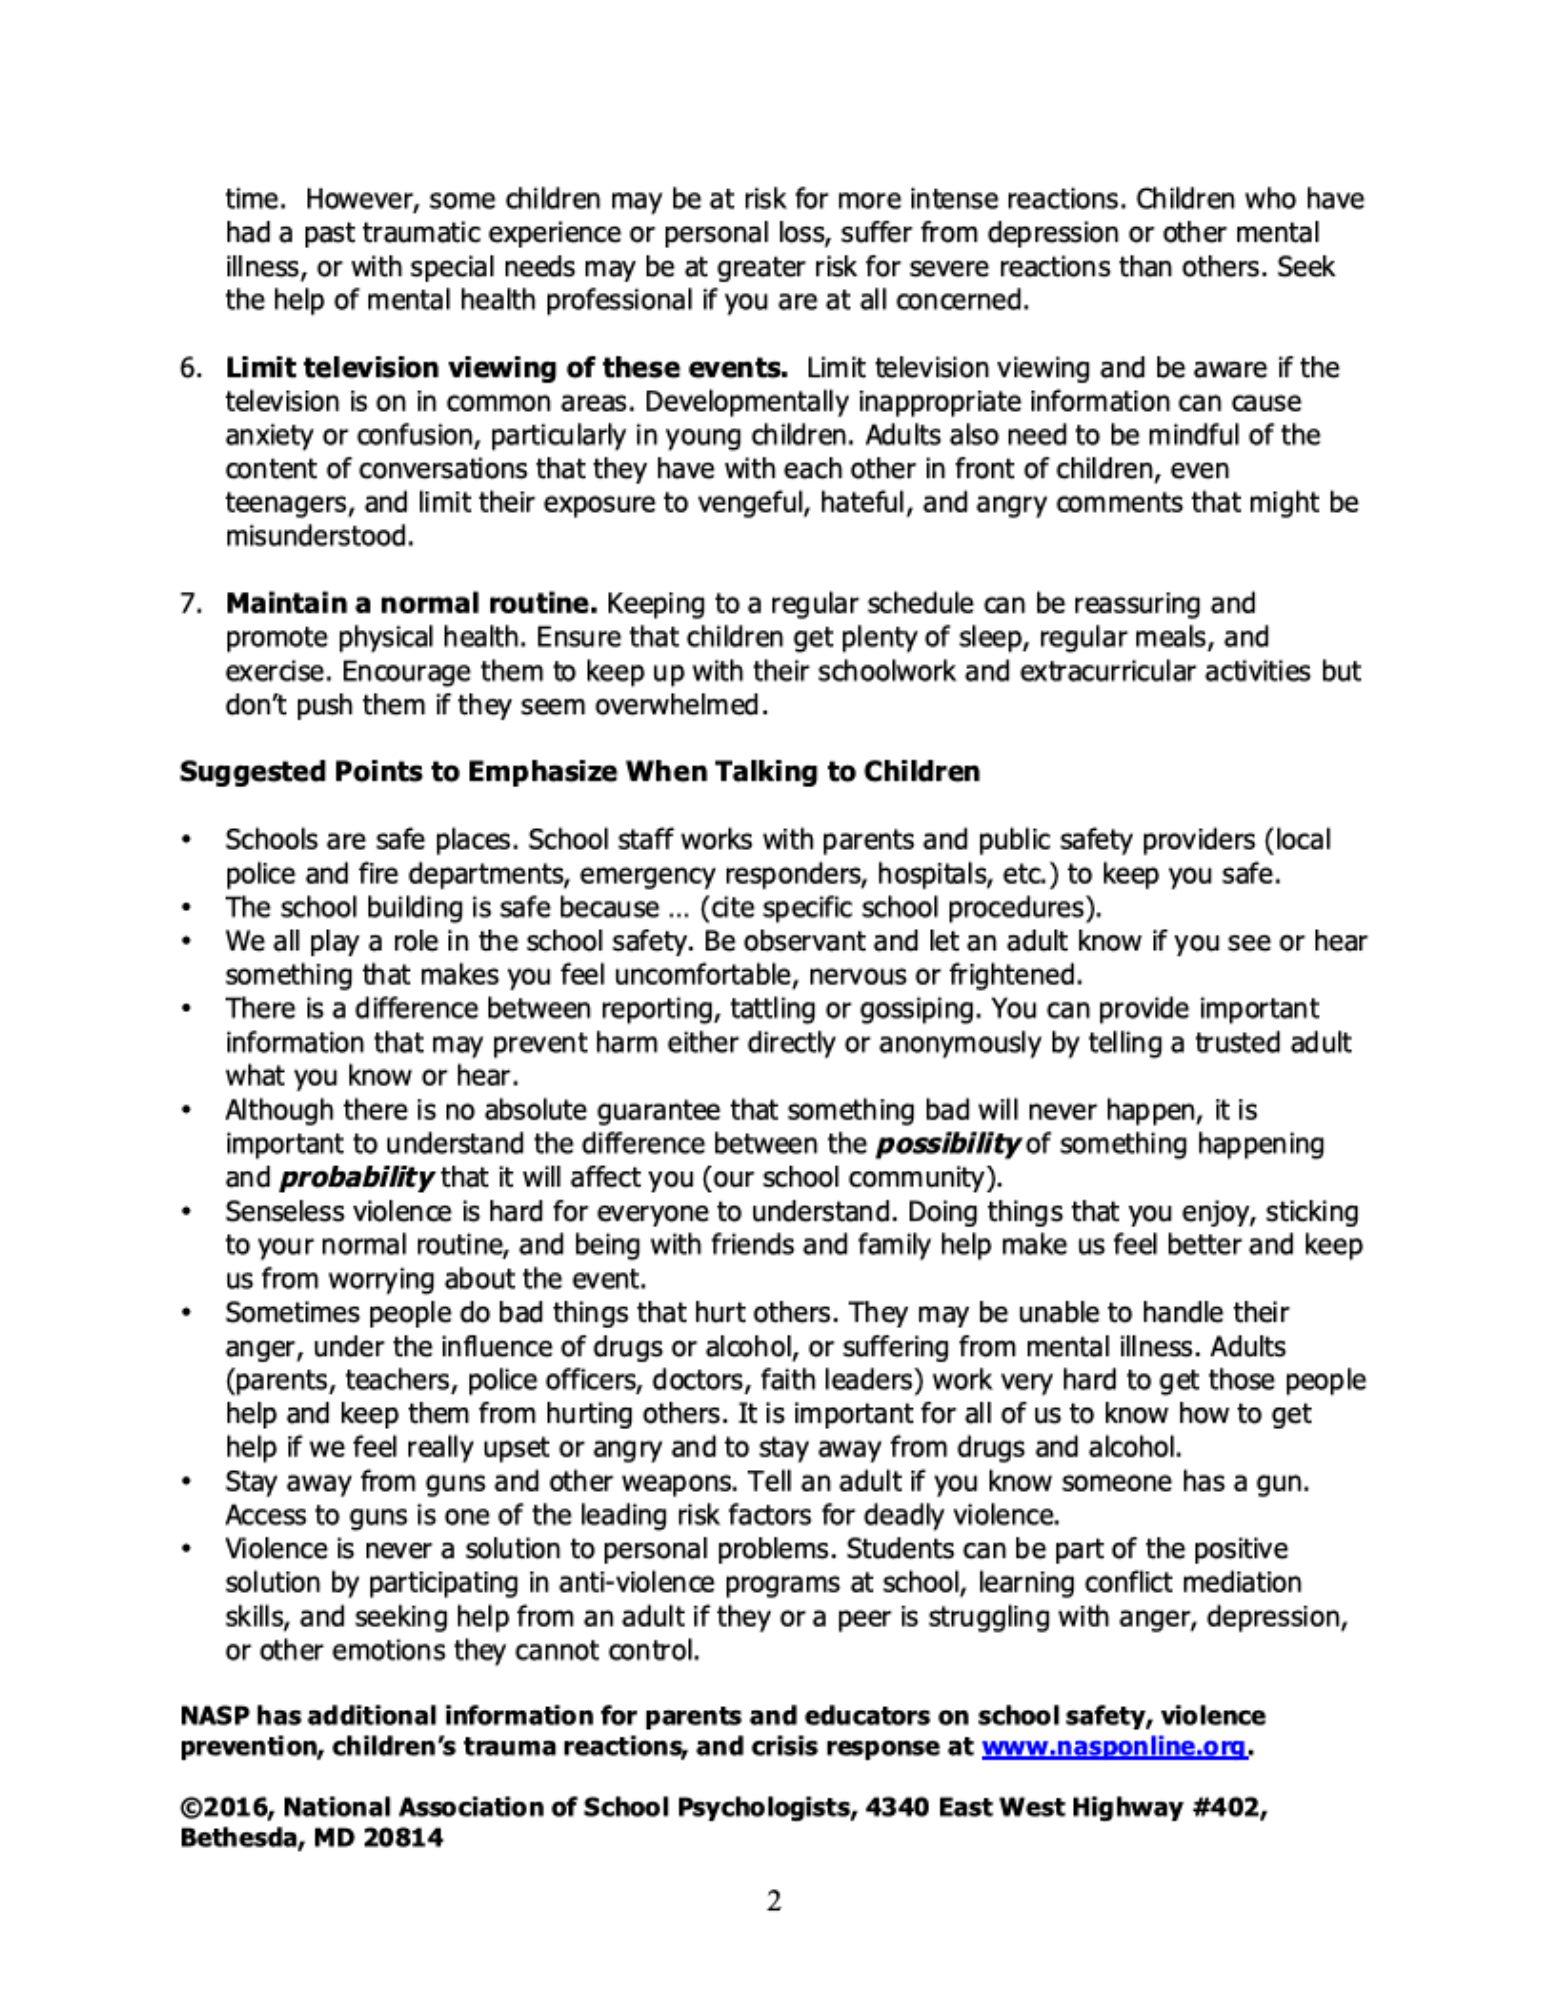 Talking to Children About Violence page 2 of 2 (Tips for Parents and Teachers)